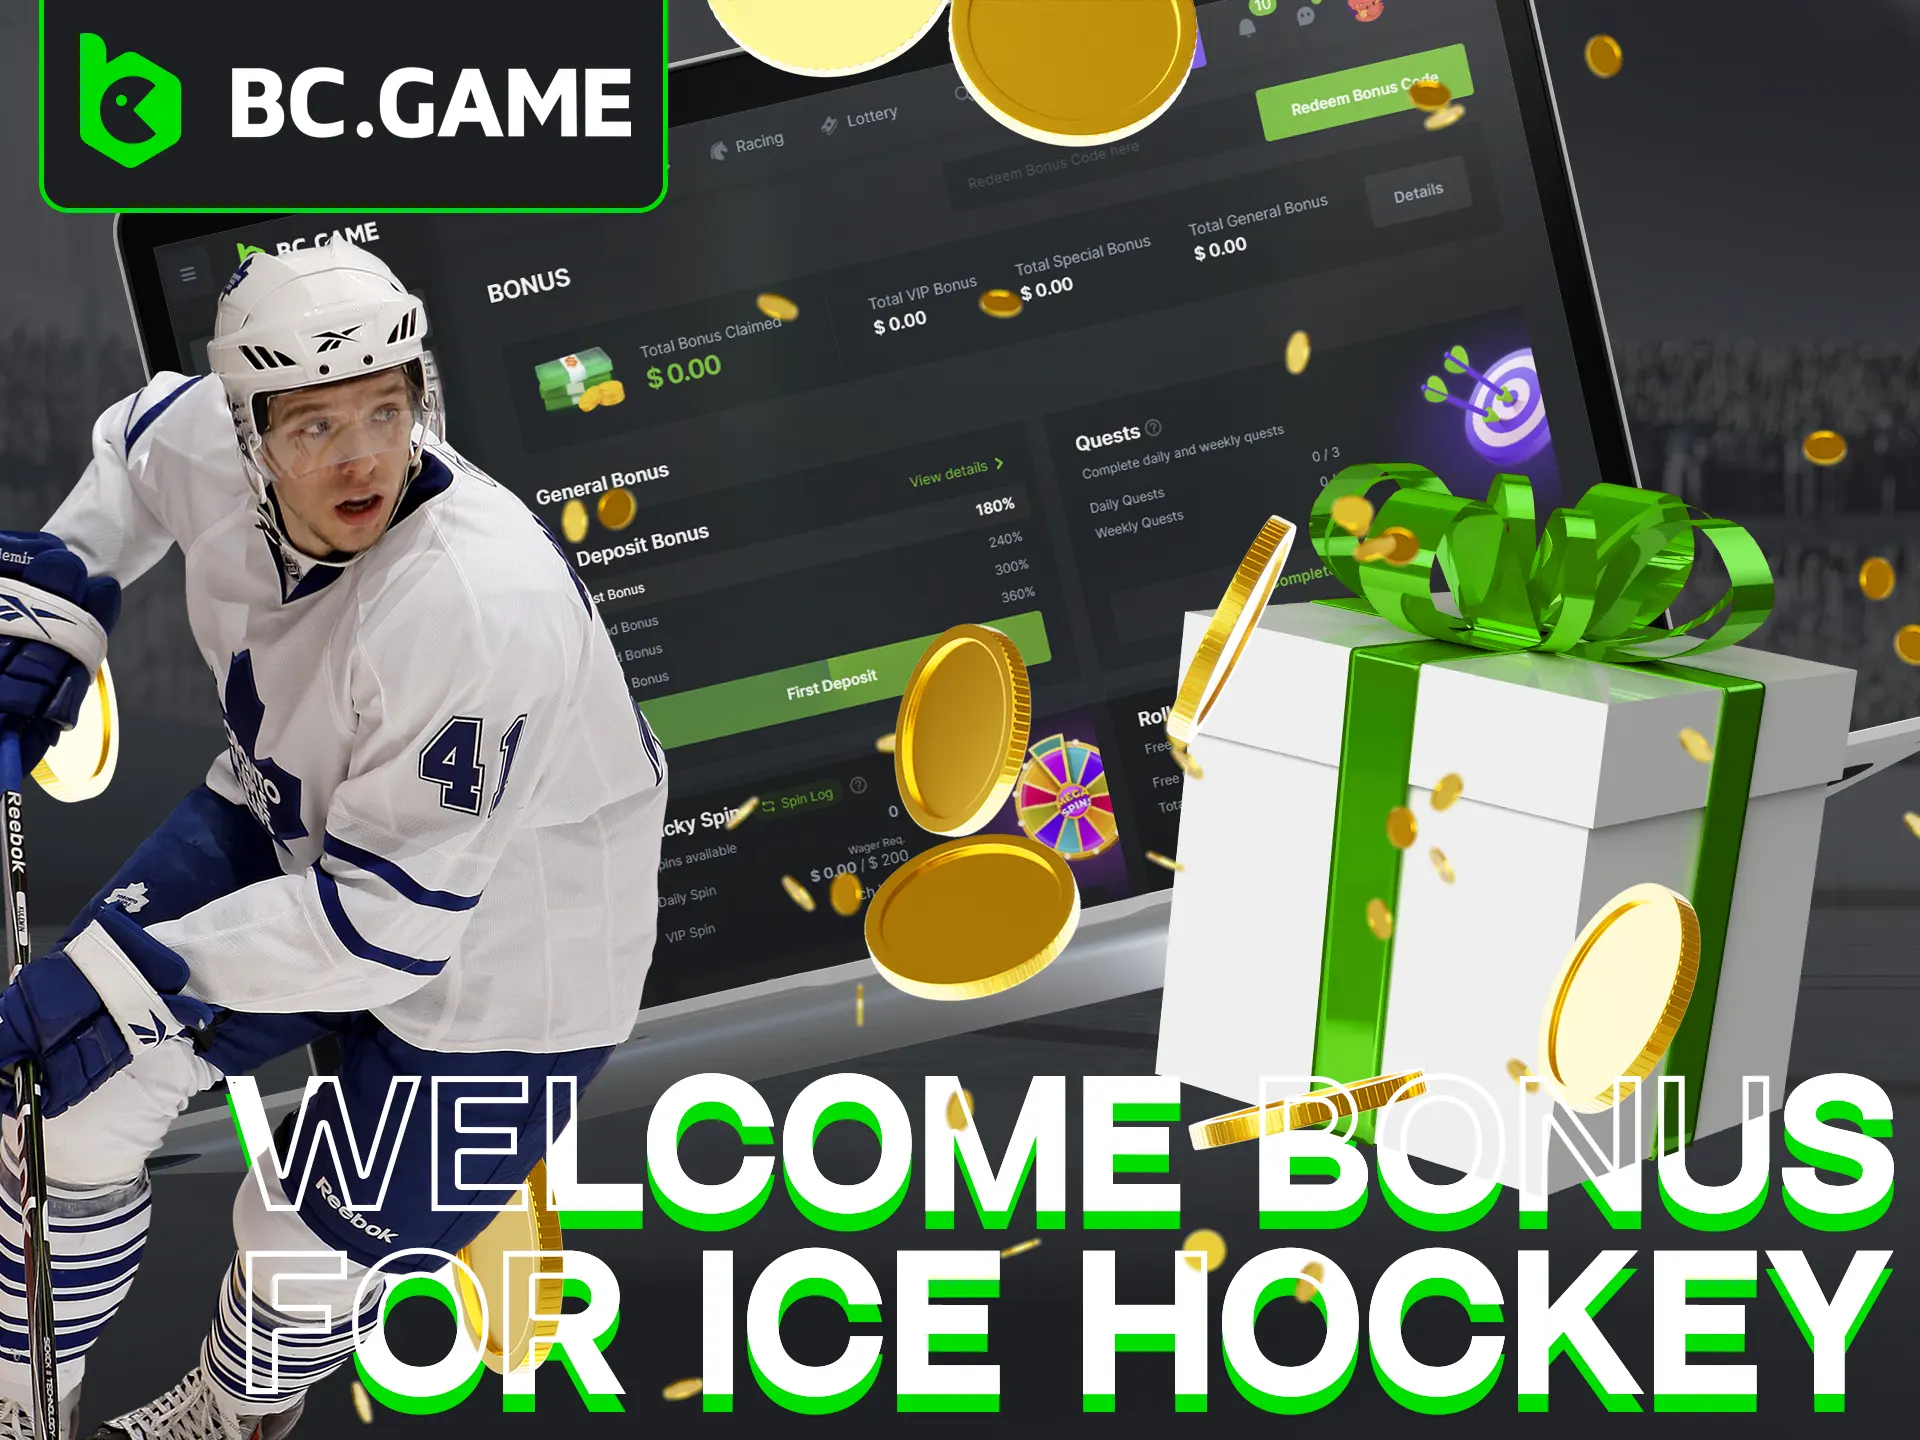 Take a welcome bonus for extra funds for ice hockey bets at BC Game.